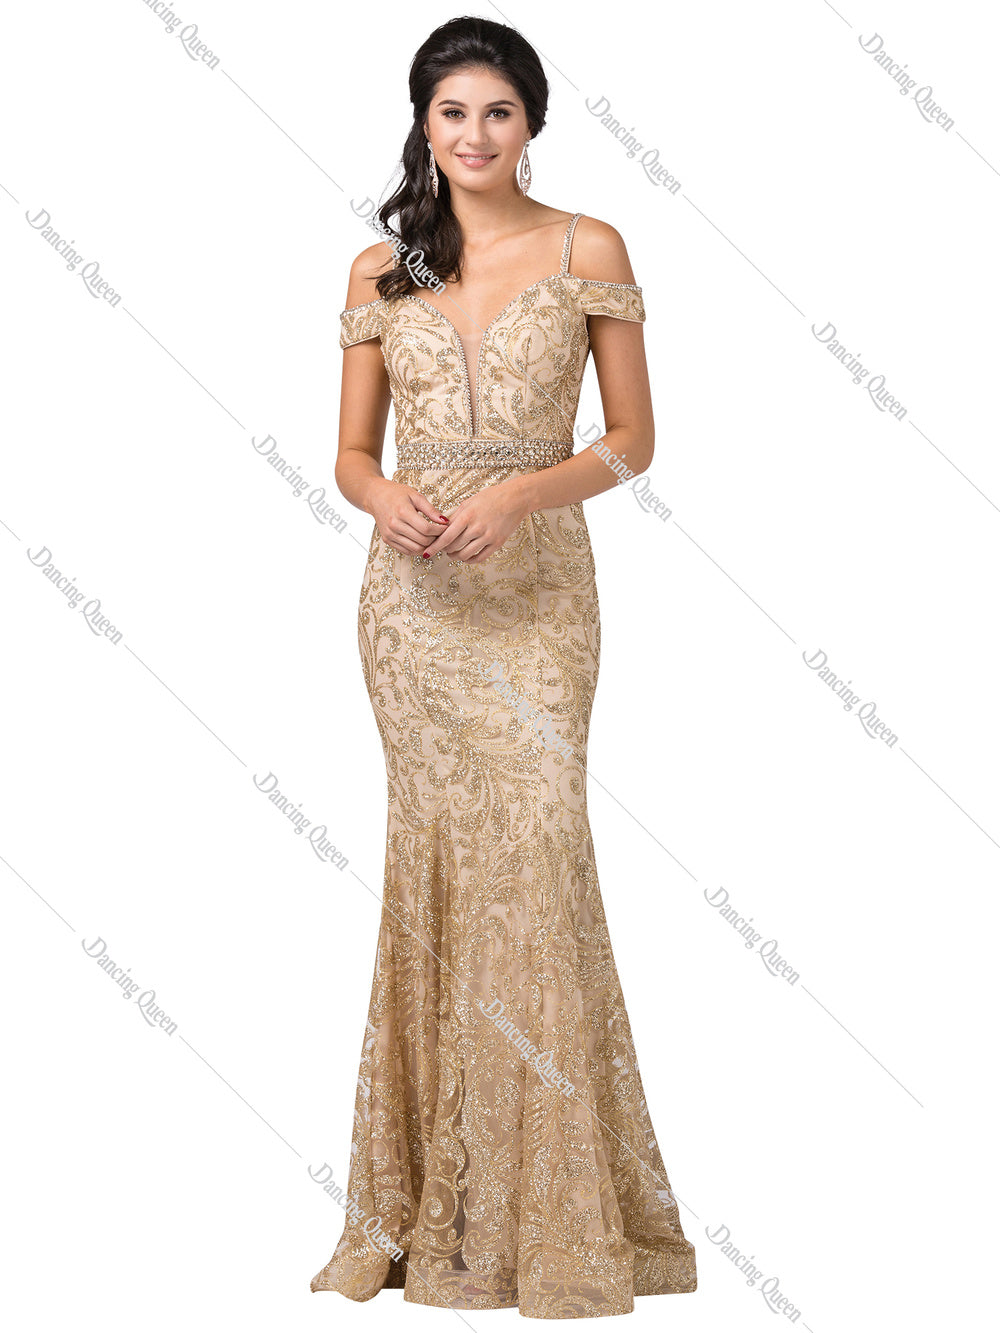 DQ 2772- Glitter Patterned Off the Shoulder Fit & Flare Prom Gown V-Neck & Beaded Belt Prom Dress Dancing Queen XS GOLD 